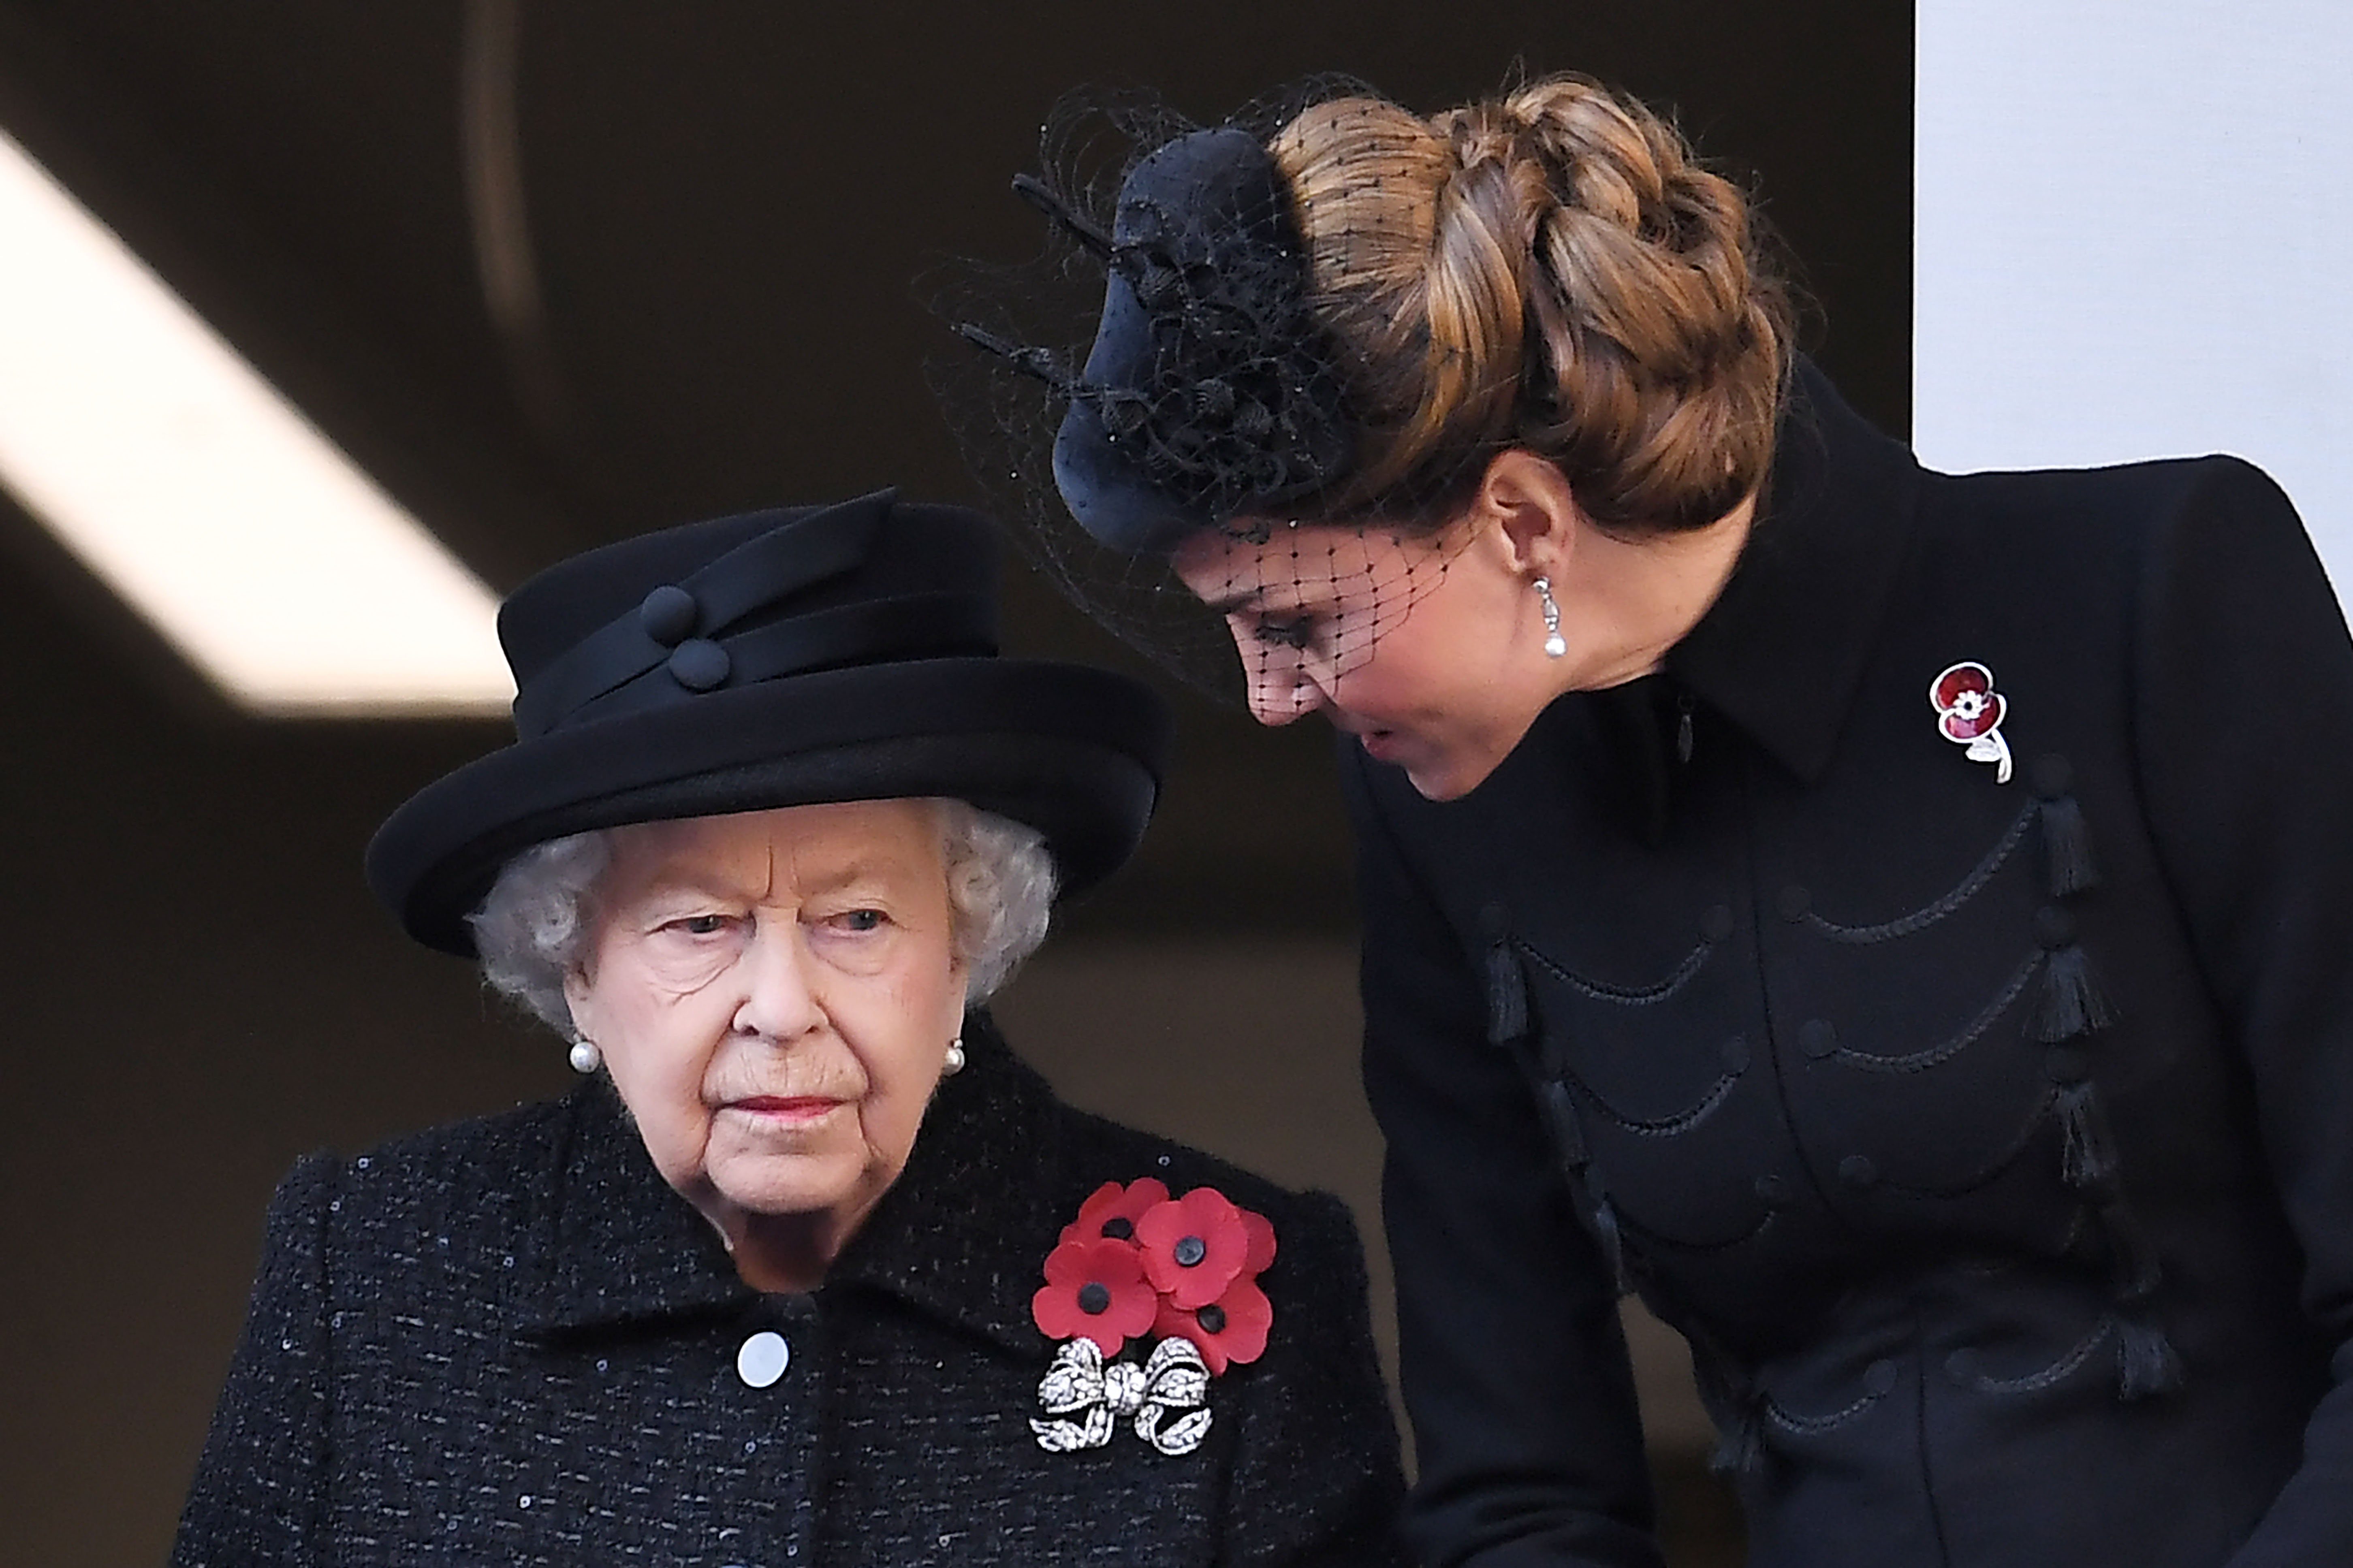 Mandatory Credit: Photo by James Veysey/Shutterstock (10469662ds) Queen Elizabeth II and Catherine Duchess of Cambridge Remembrance Day Service, The Cenotaph, Whitehall, London, UK - 10 Nov 2019